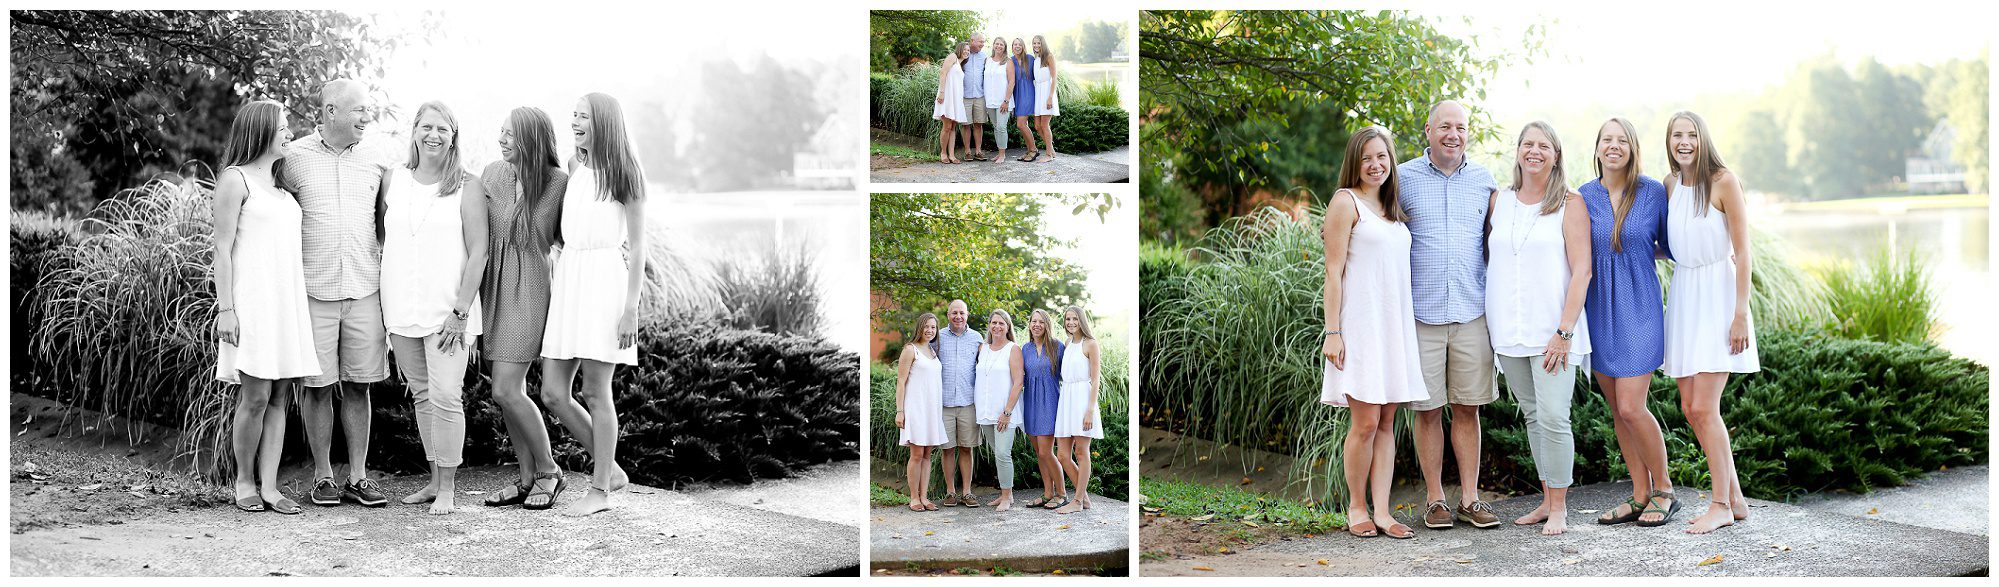 Fluvanna Family Summer Portraits Lake Monticello photographer charlottesville cville beach pictures sisters teenagers beautiful girls